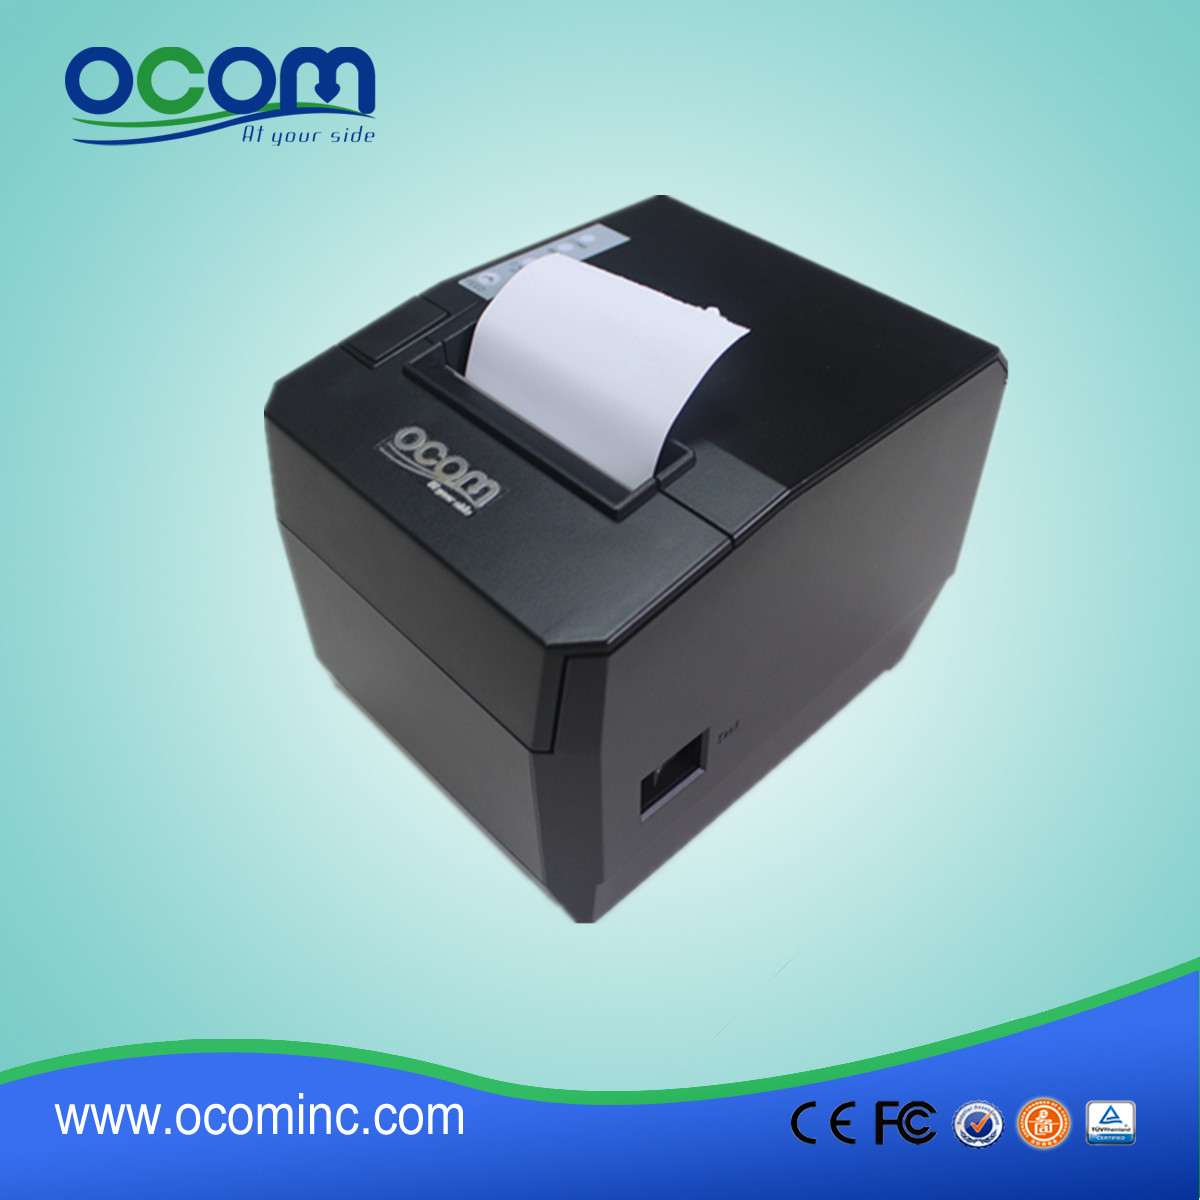 Re: China gemaakt low cost 80mm WIFI POS-printer-OCPP-88A-W